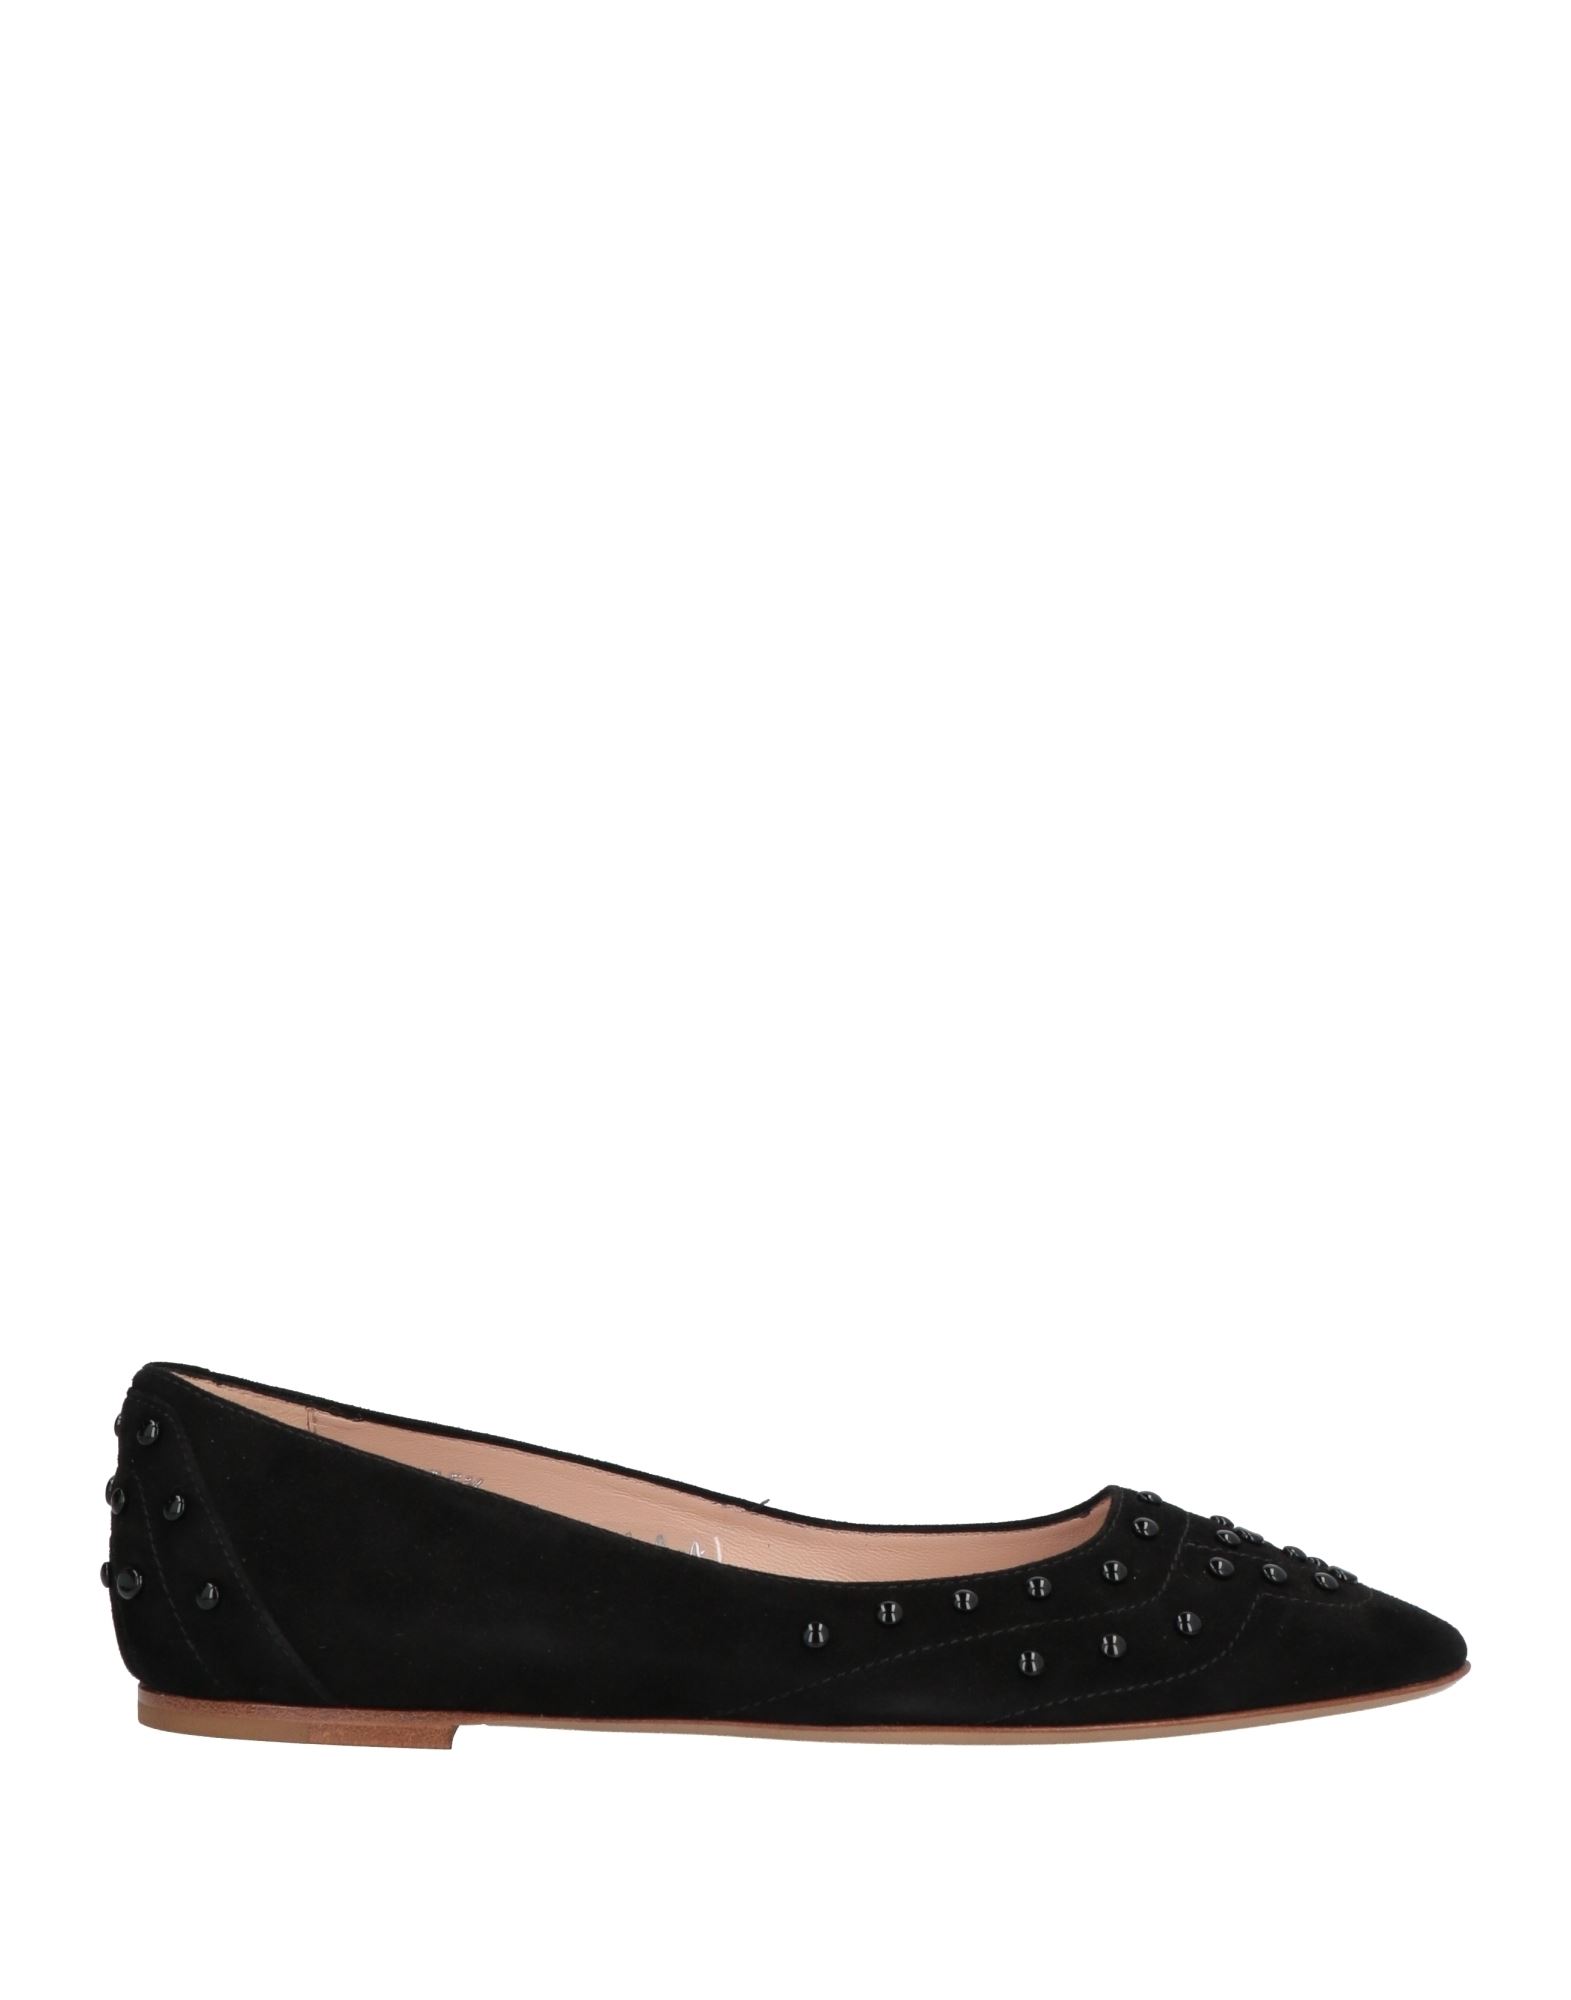 TOD'S TOD'S WOMAN BALLET FLATS BLACK SIZE 7.5 SOFT LEATHER